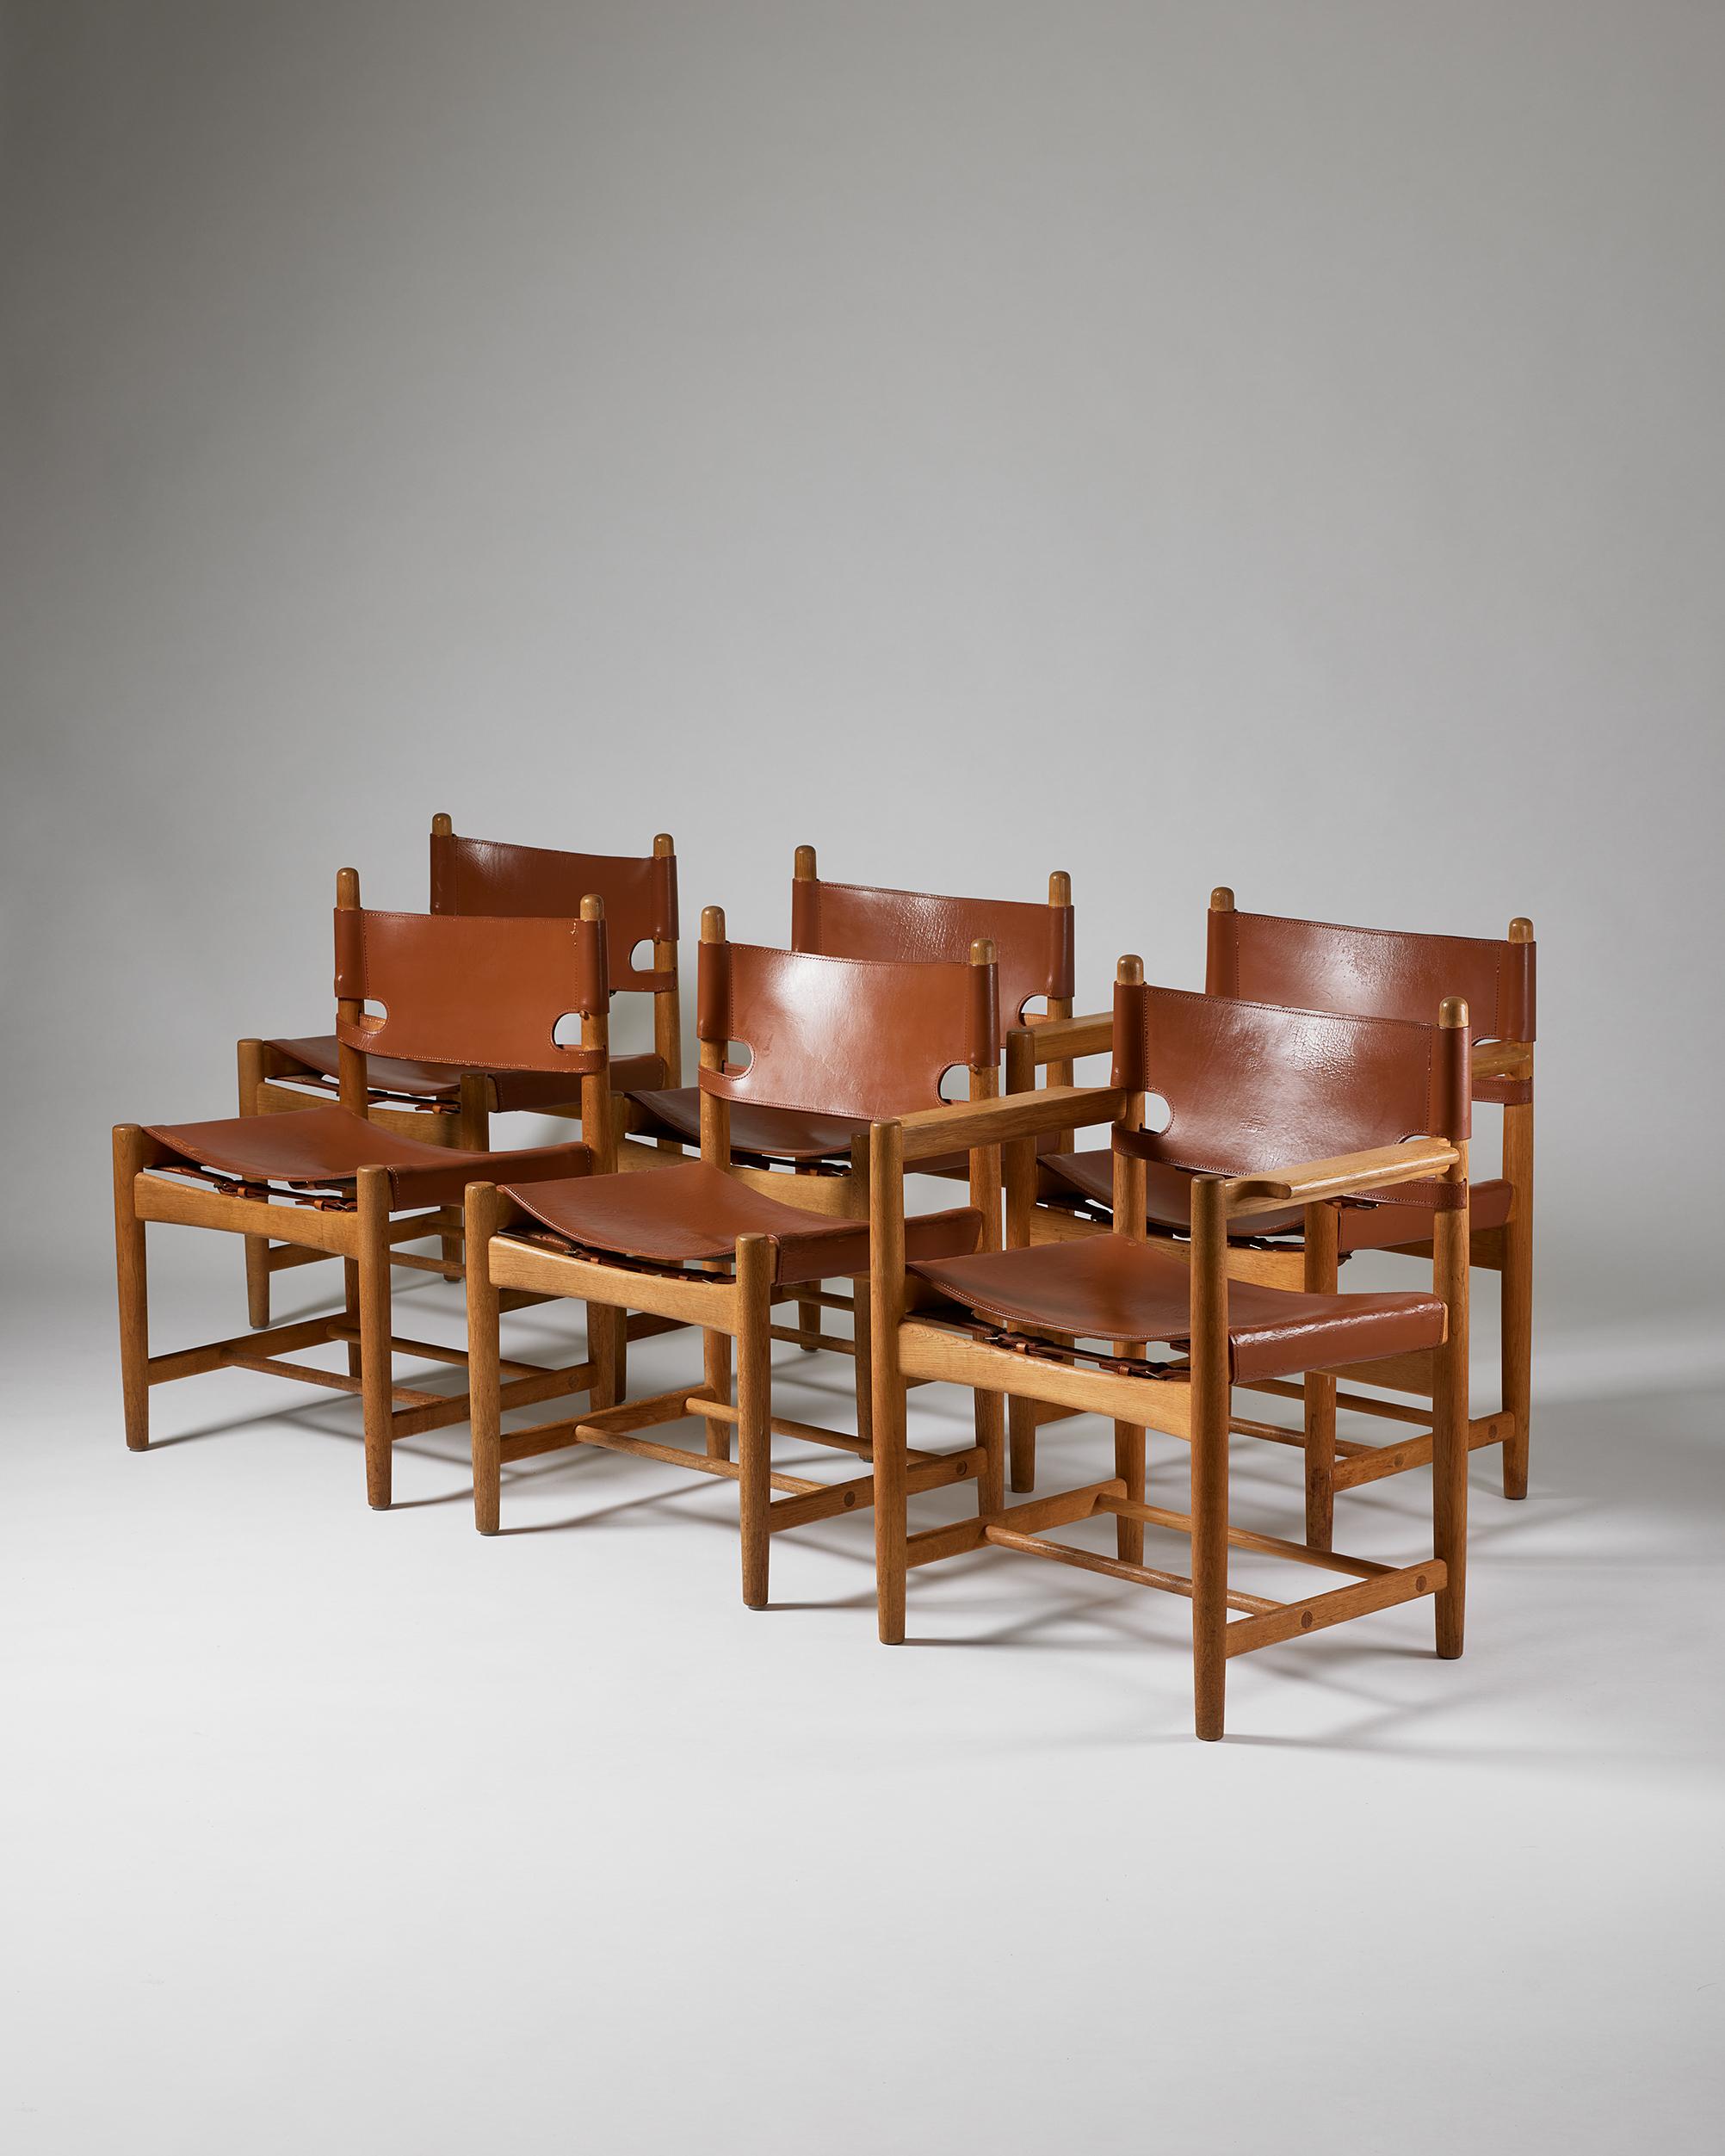 Set of six model 3238 ‘Spanish’ dining chairs designed by Borge Mogensen for Fredericia Stolefabrik,
Denmark, 1950s.

Oak and leather.

The set contains two armchairs and four dining chairs.

Measures : H: 48 cm
W: 55 cm
D: 82 cm
SH: 43